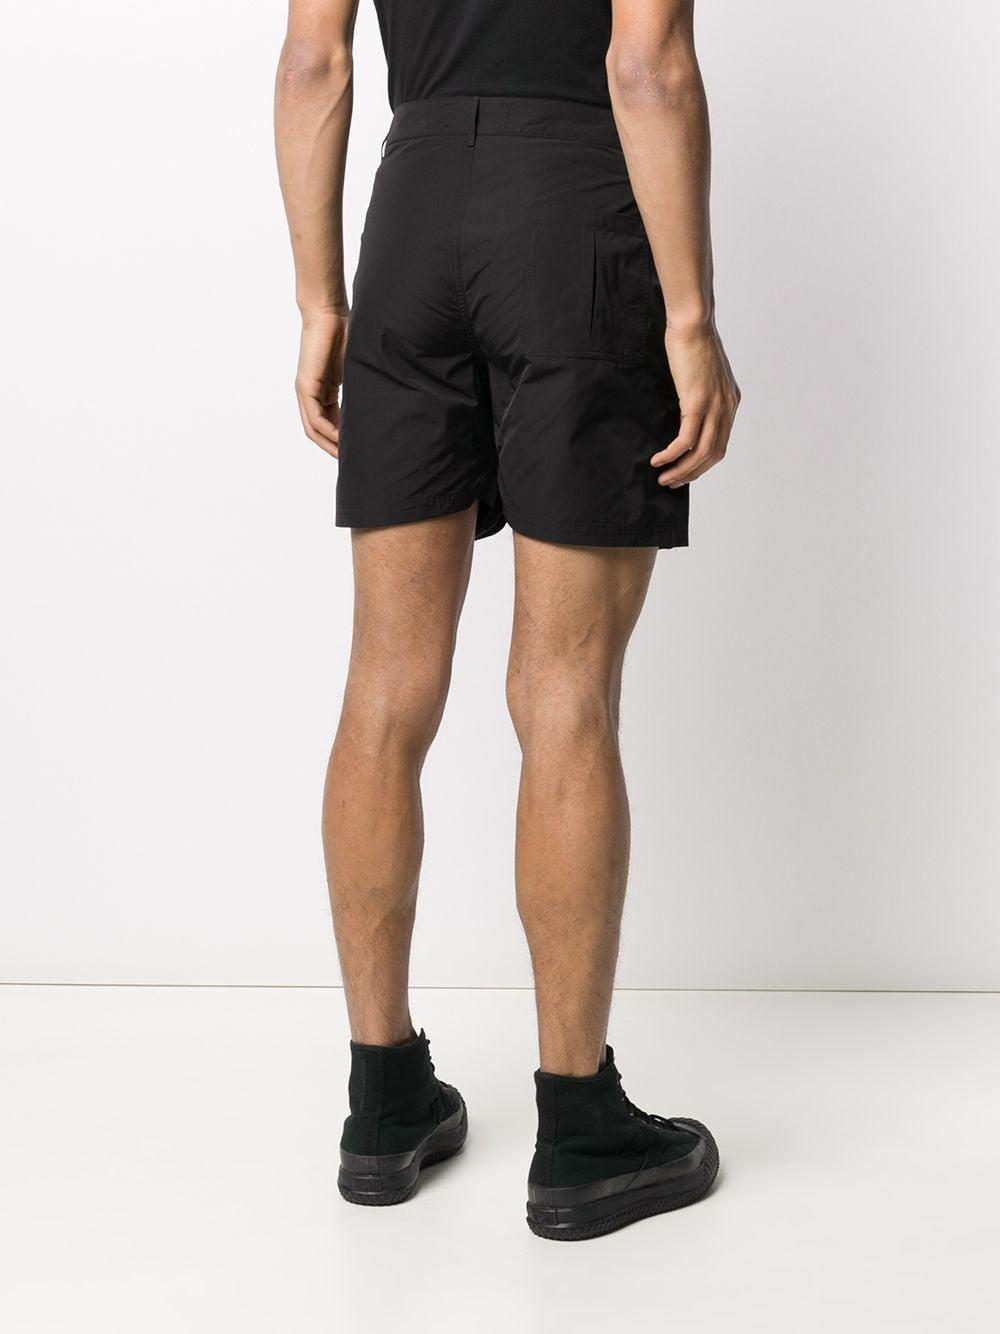 Represent Cotton Zipped Pocket Shorts in Black for Men - Lyst